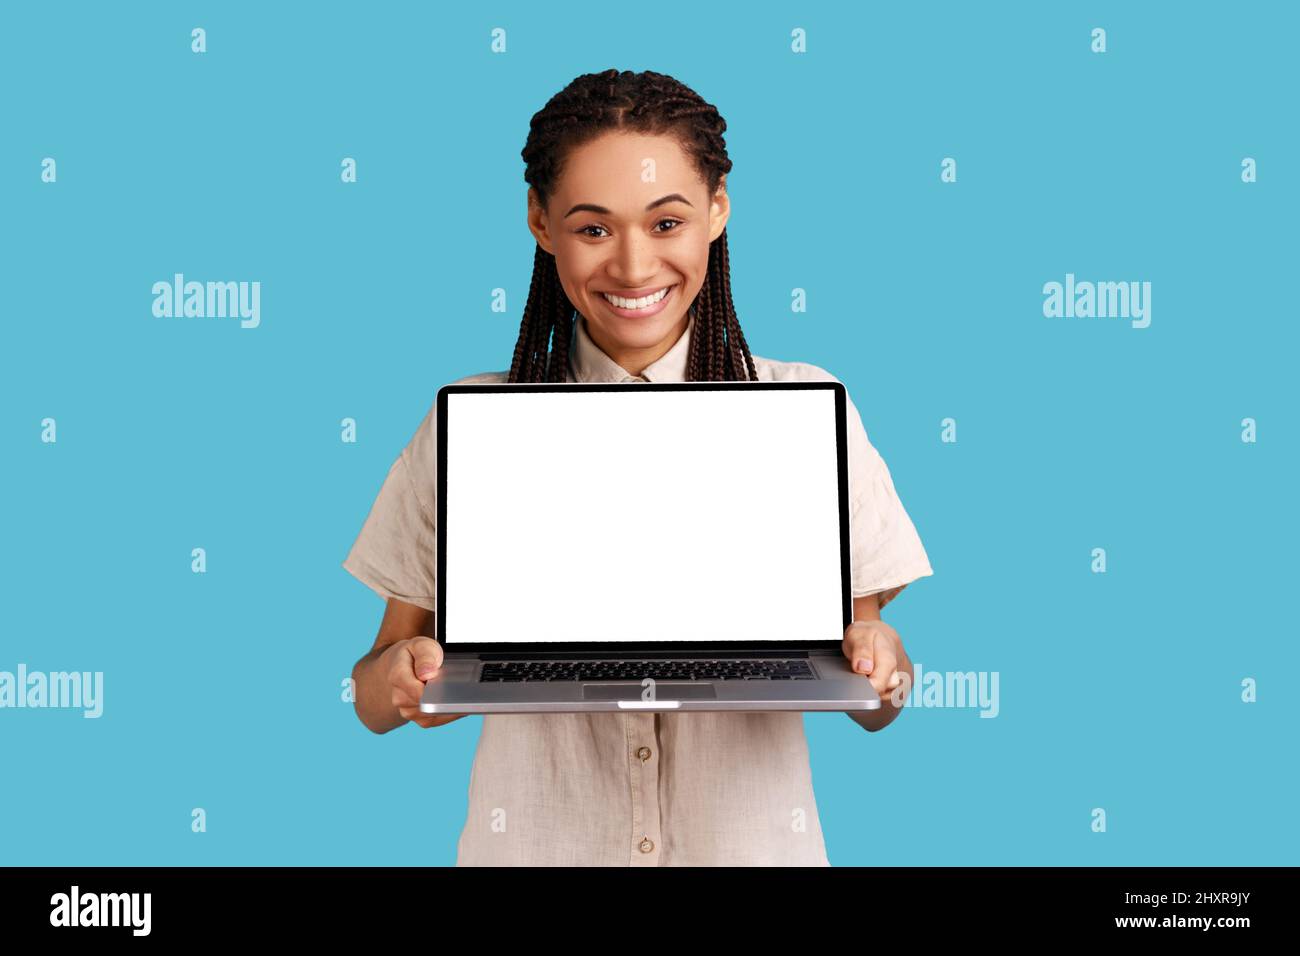 Happy woman with black dreadlocks shop assistant advertises new device, holding laptop with empty screen, expresses satisfaction, wearing white shirt. Indoor studio shot isolated on blue background. Stock Photo